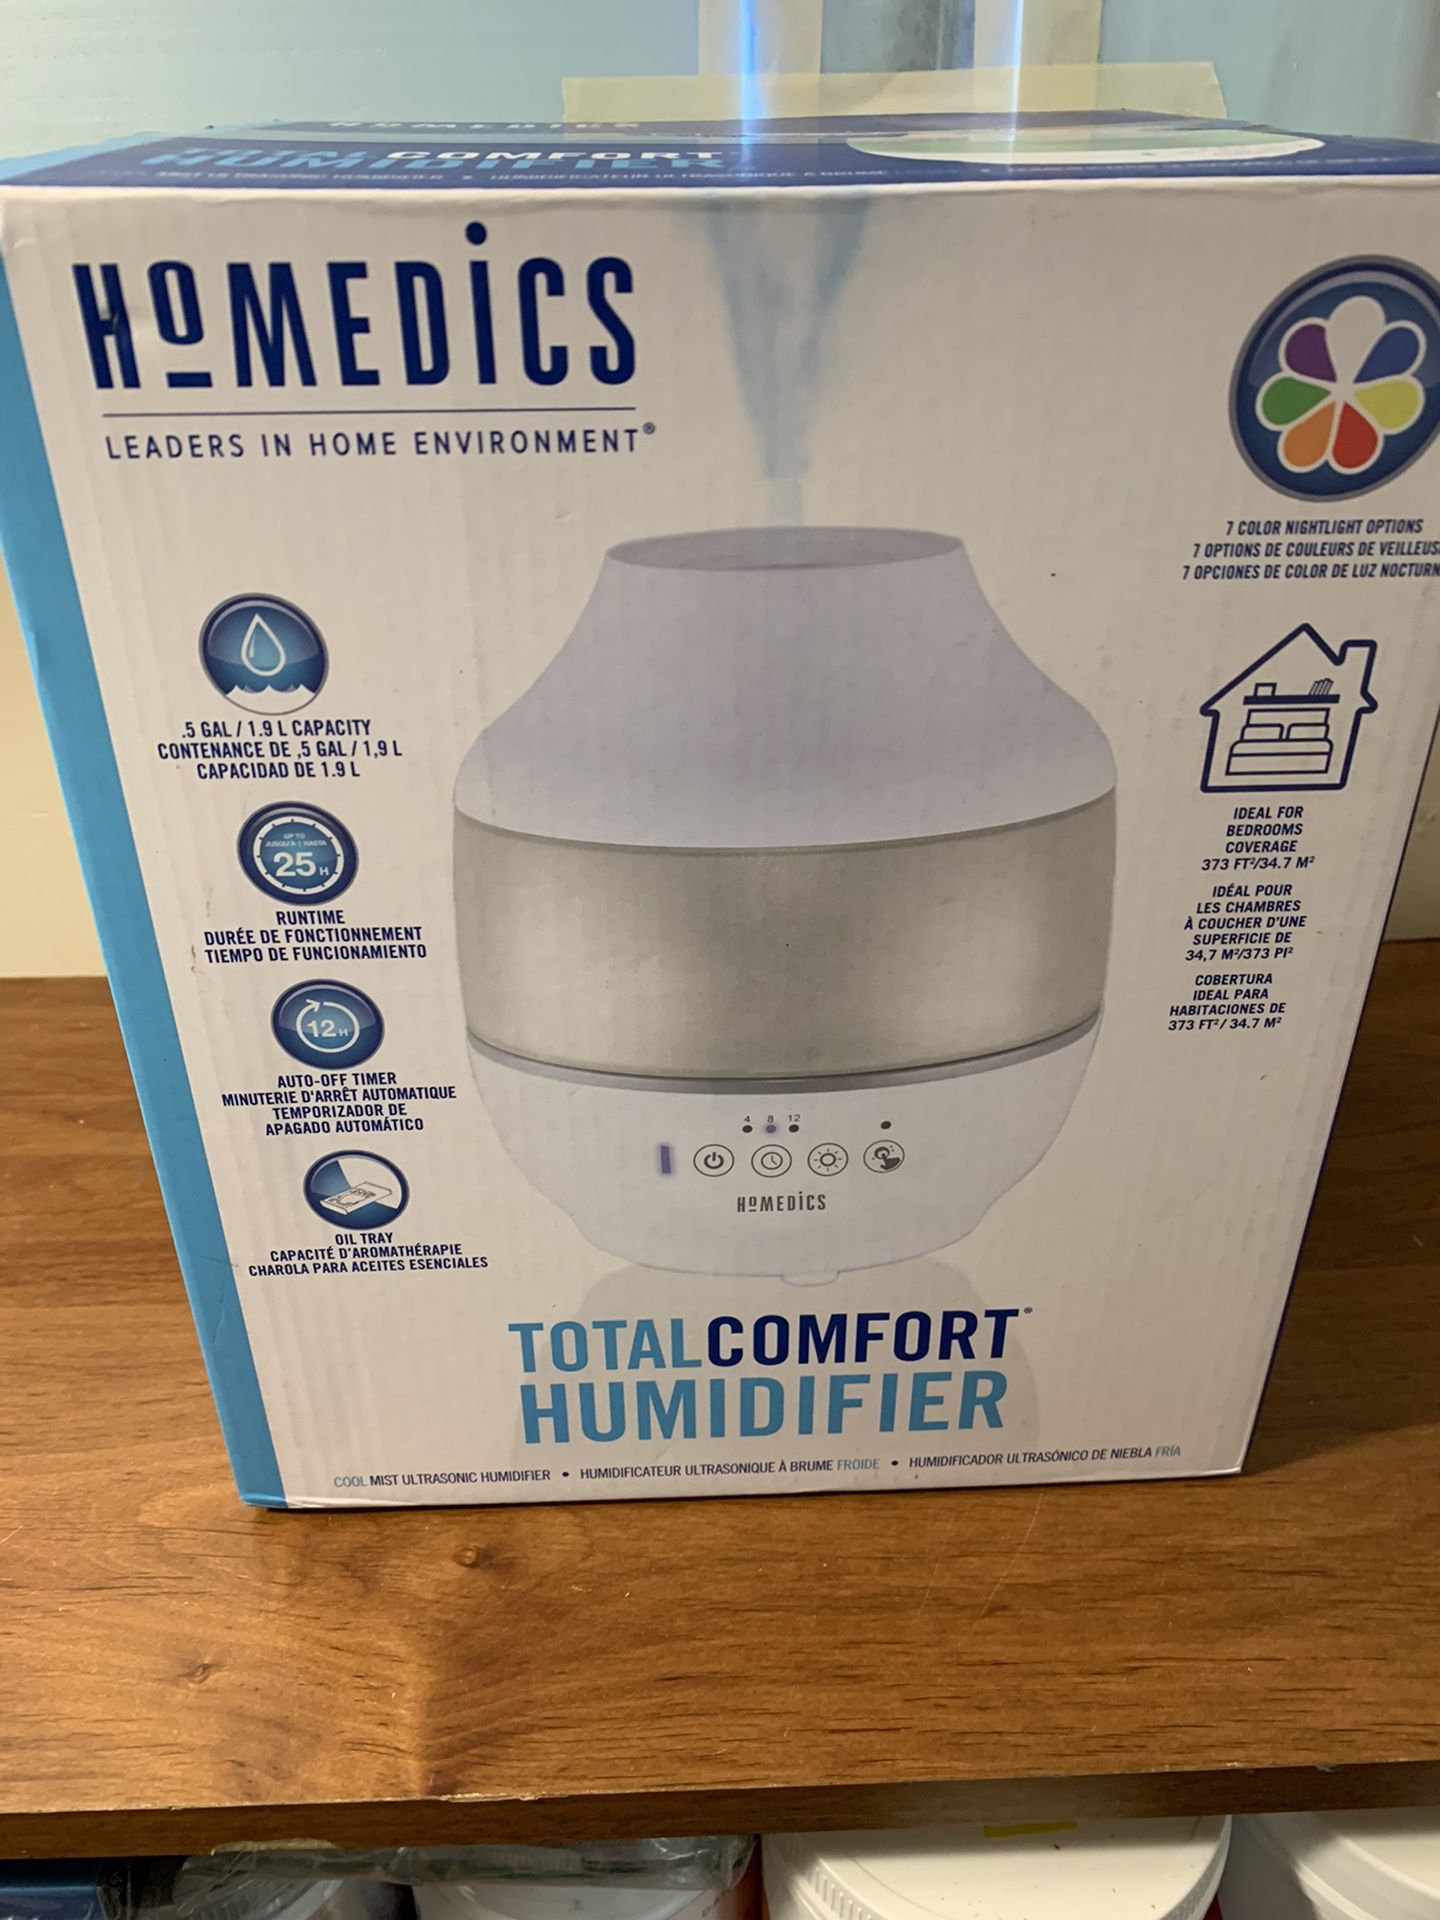 HoMedics Total Comfort Humidifier with 360 Nozzle, Micro-Fine Cool Mist, with 7 Night Light colors and a 25 Hour Run Time